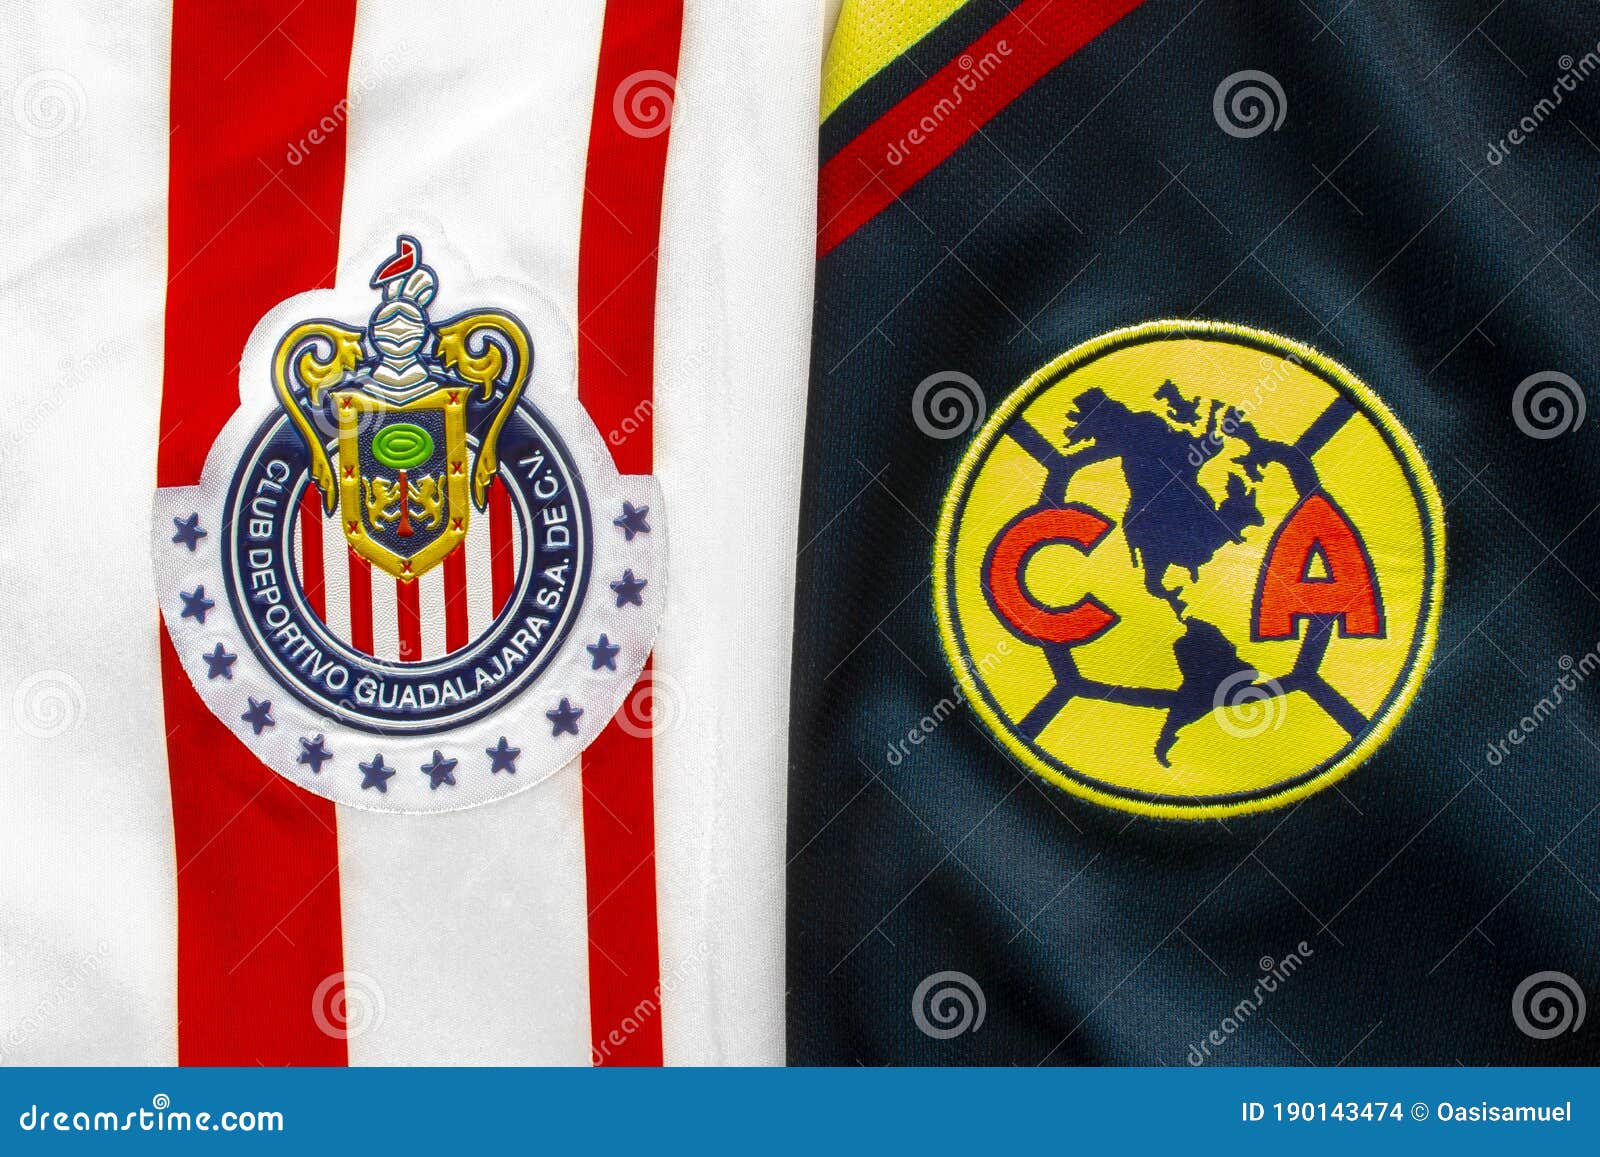 Guadalajara Chivas Vs Club America Football Soccer Close Up To Their Logo  on a Jersey Editorial Stock Image - Image of stitch, textured: 190143474